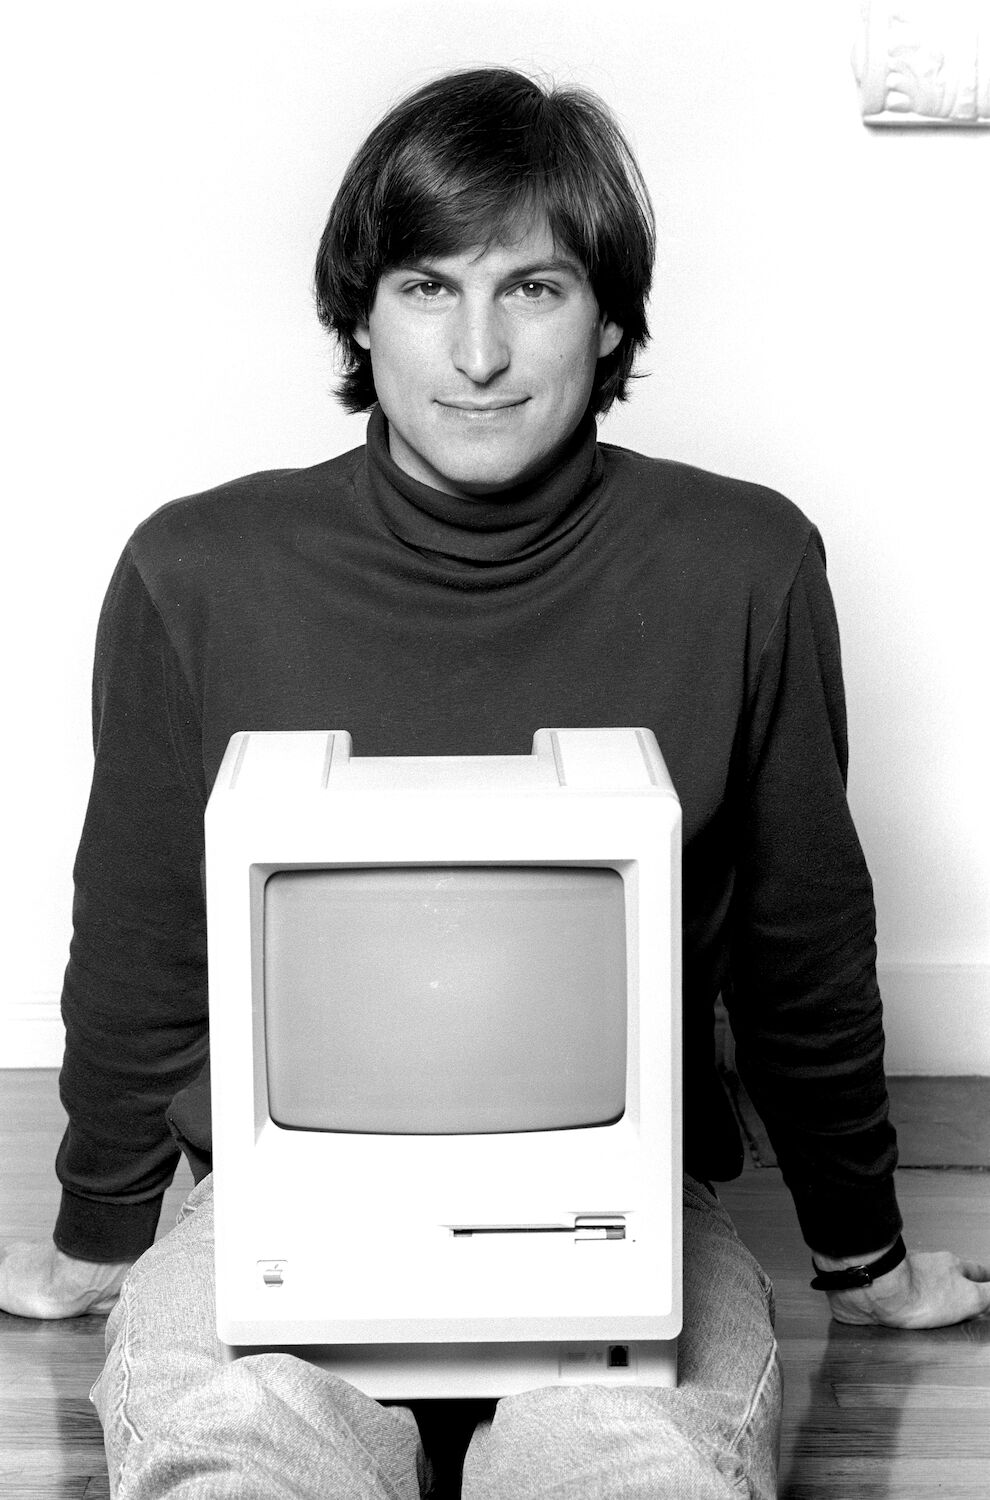 29-year-old Steve wearing a black turtleneck and jeans, poses with a Macintosh computer resting in his lap.